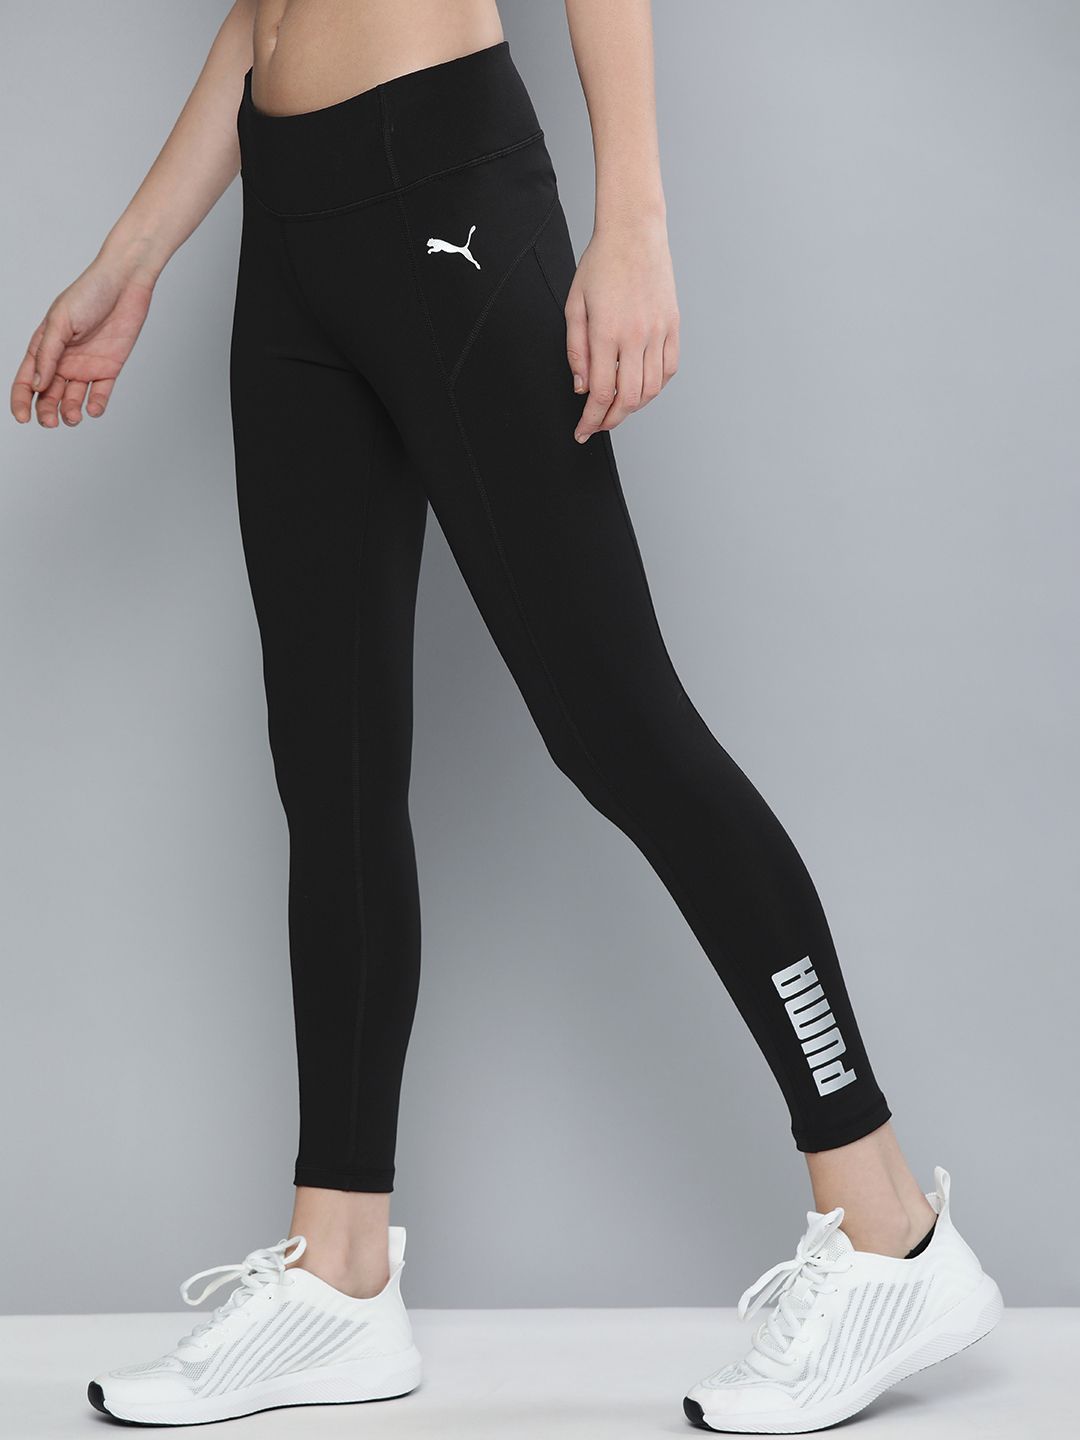 Puma Women Black Solid dryCELL RTG Training Tights Price in India